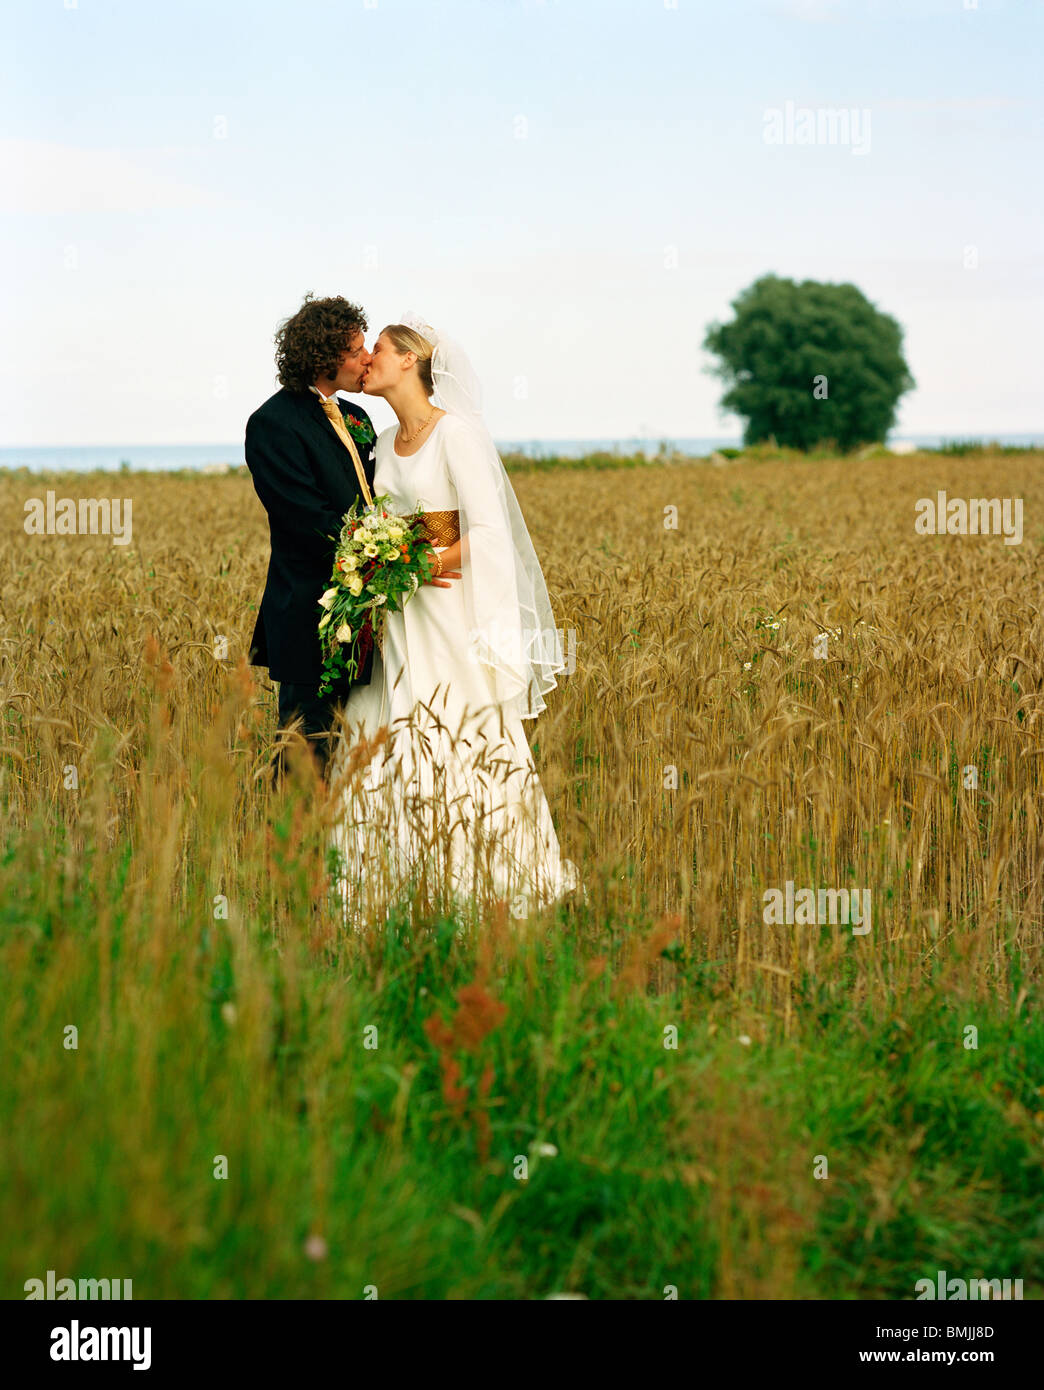 Scandinavia, Sweden, Oland, Bride and groom kissing in field Stock Photo